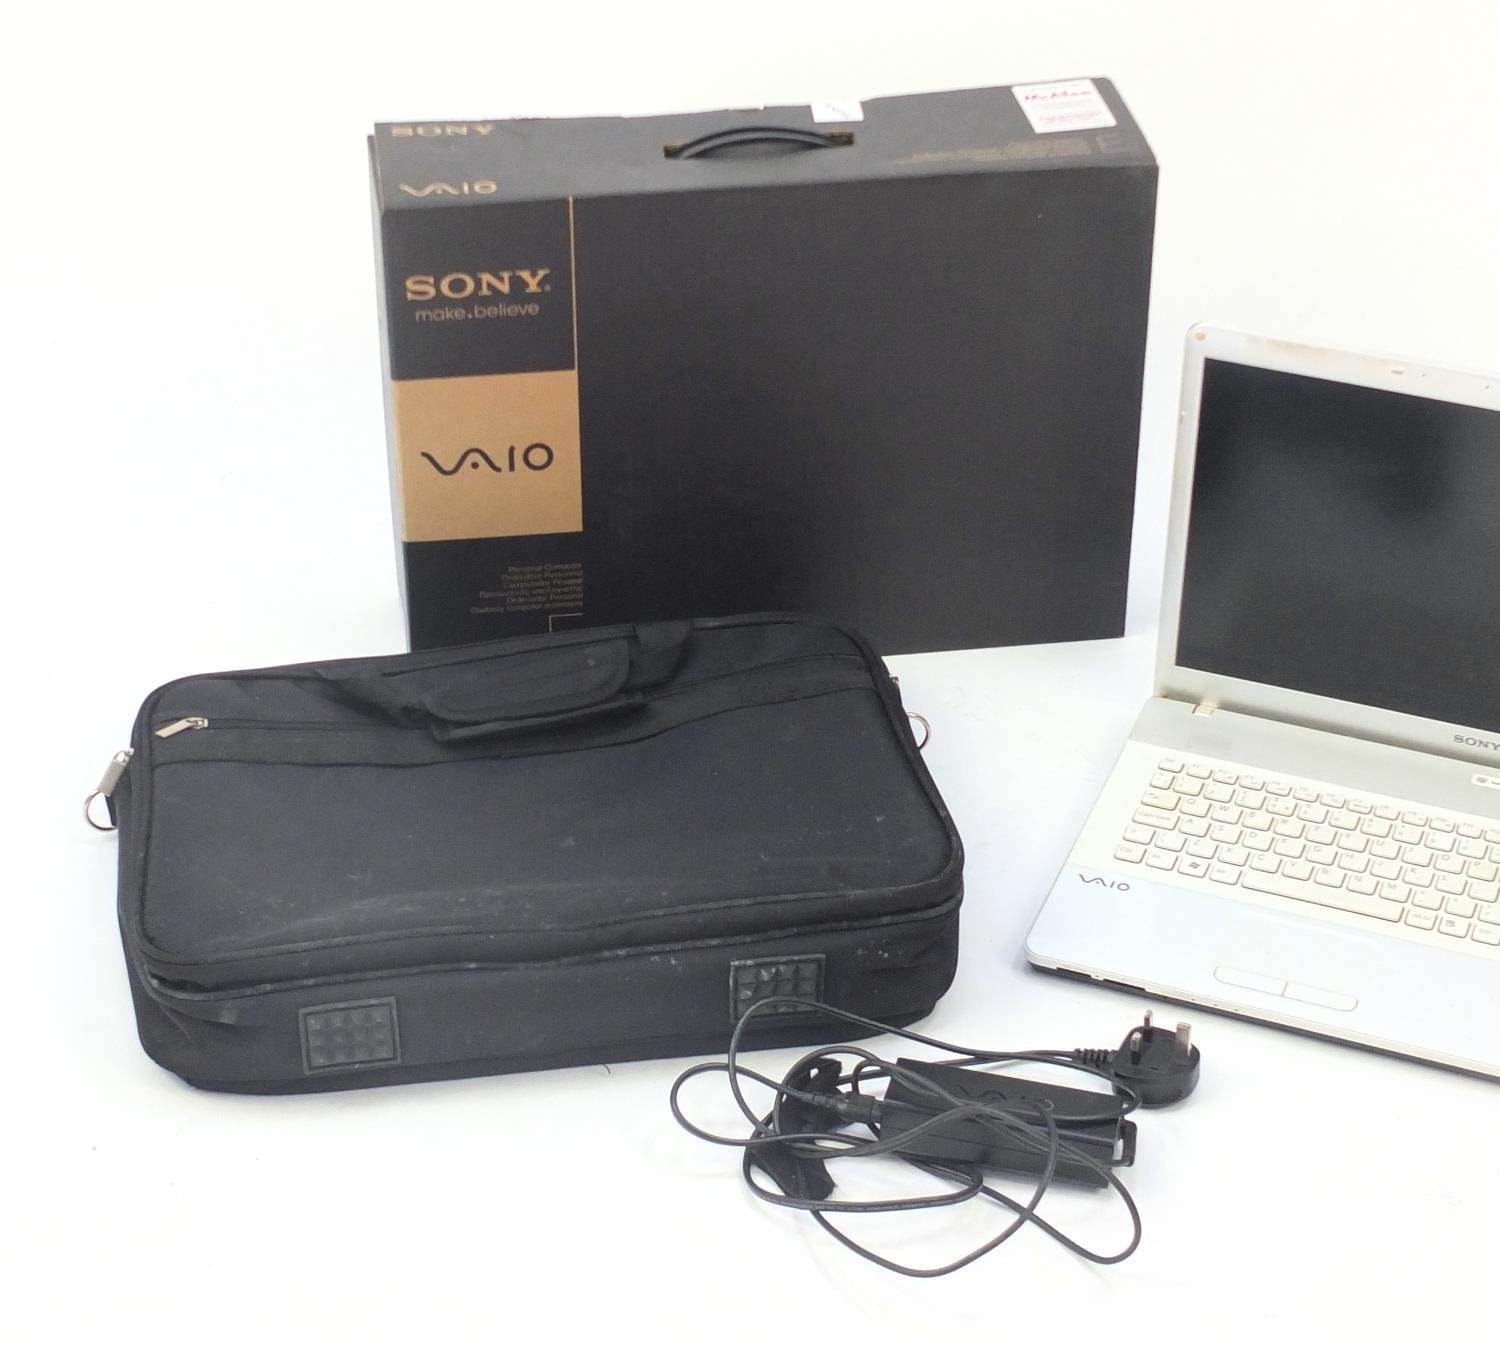 Sony Vaio i.5 laptop, model PCG-911111M : For Further Condition Reports Please Visit our website - Image 2 of 3